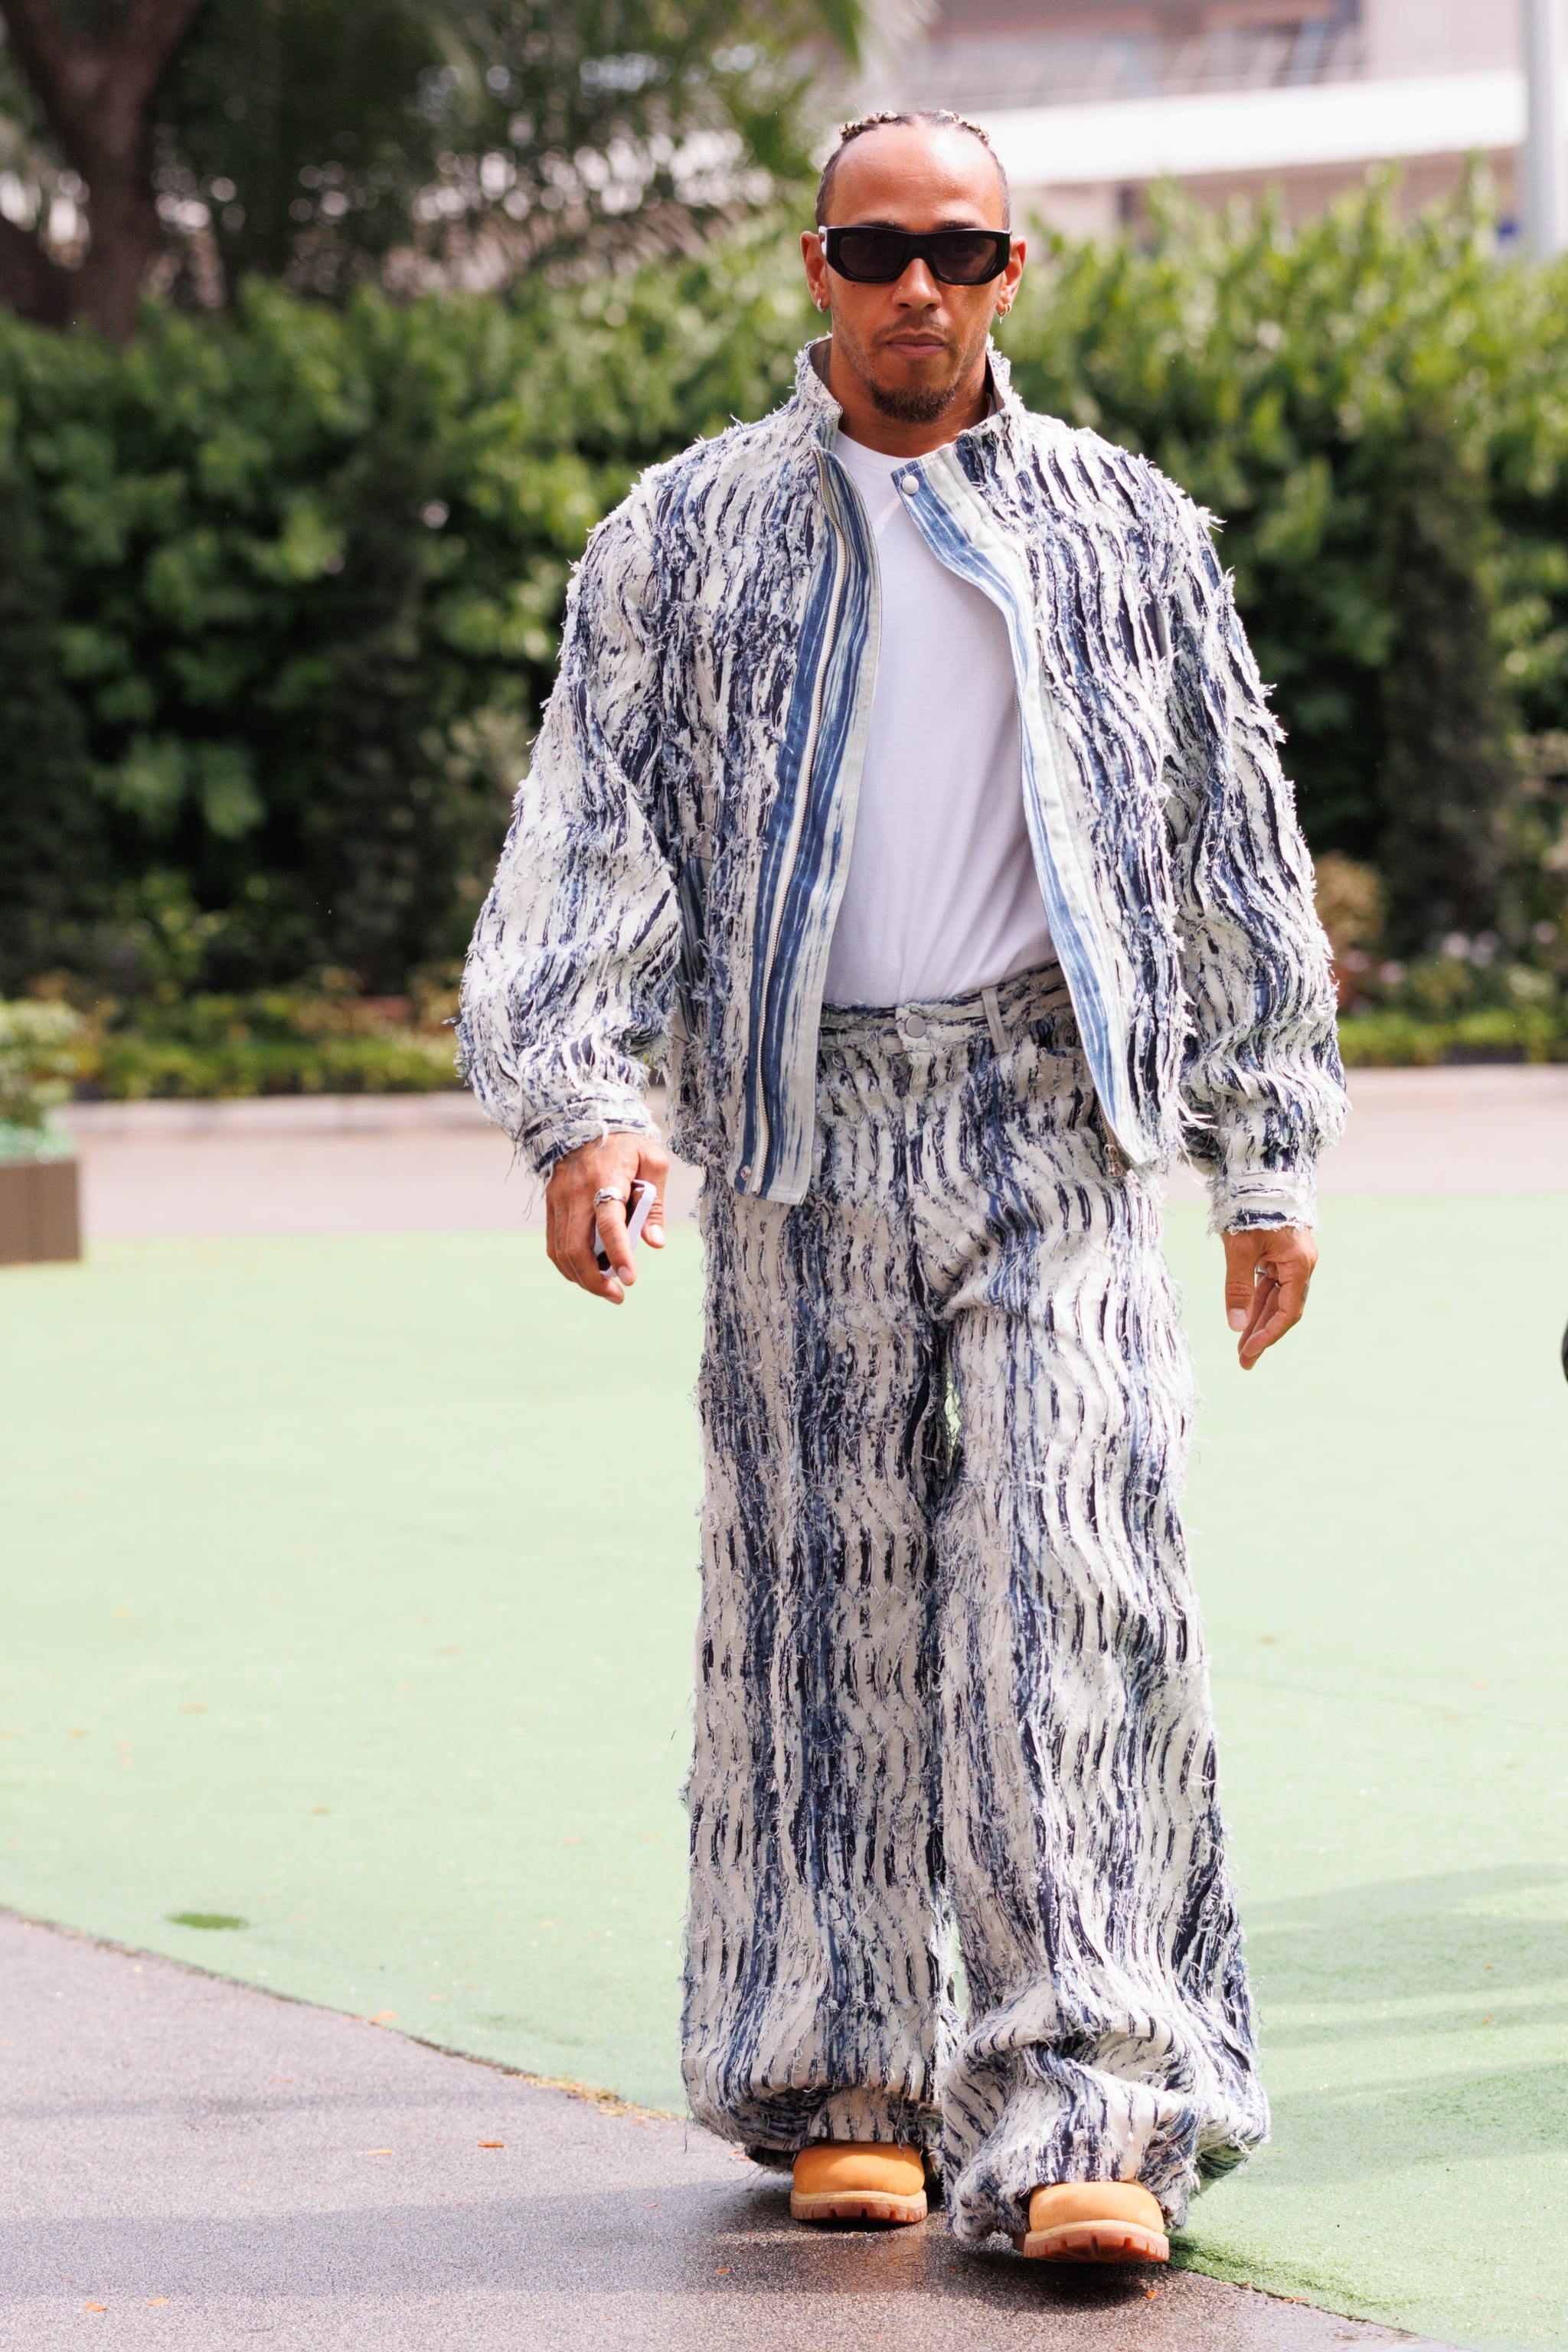 Lewis Hamilton Brings His Fashionable Style to F1's Belgian Grand